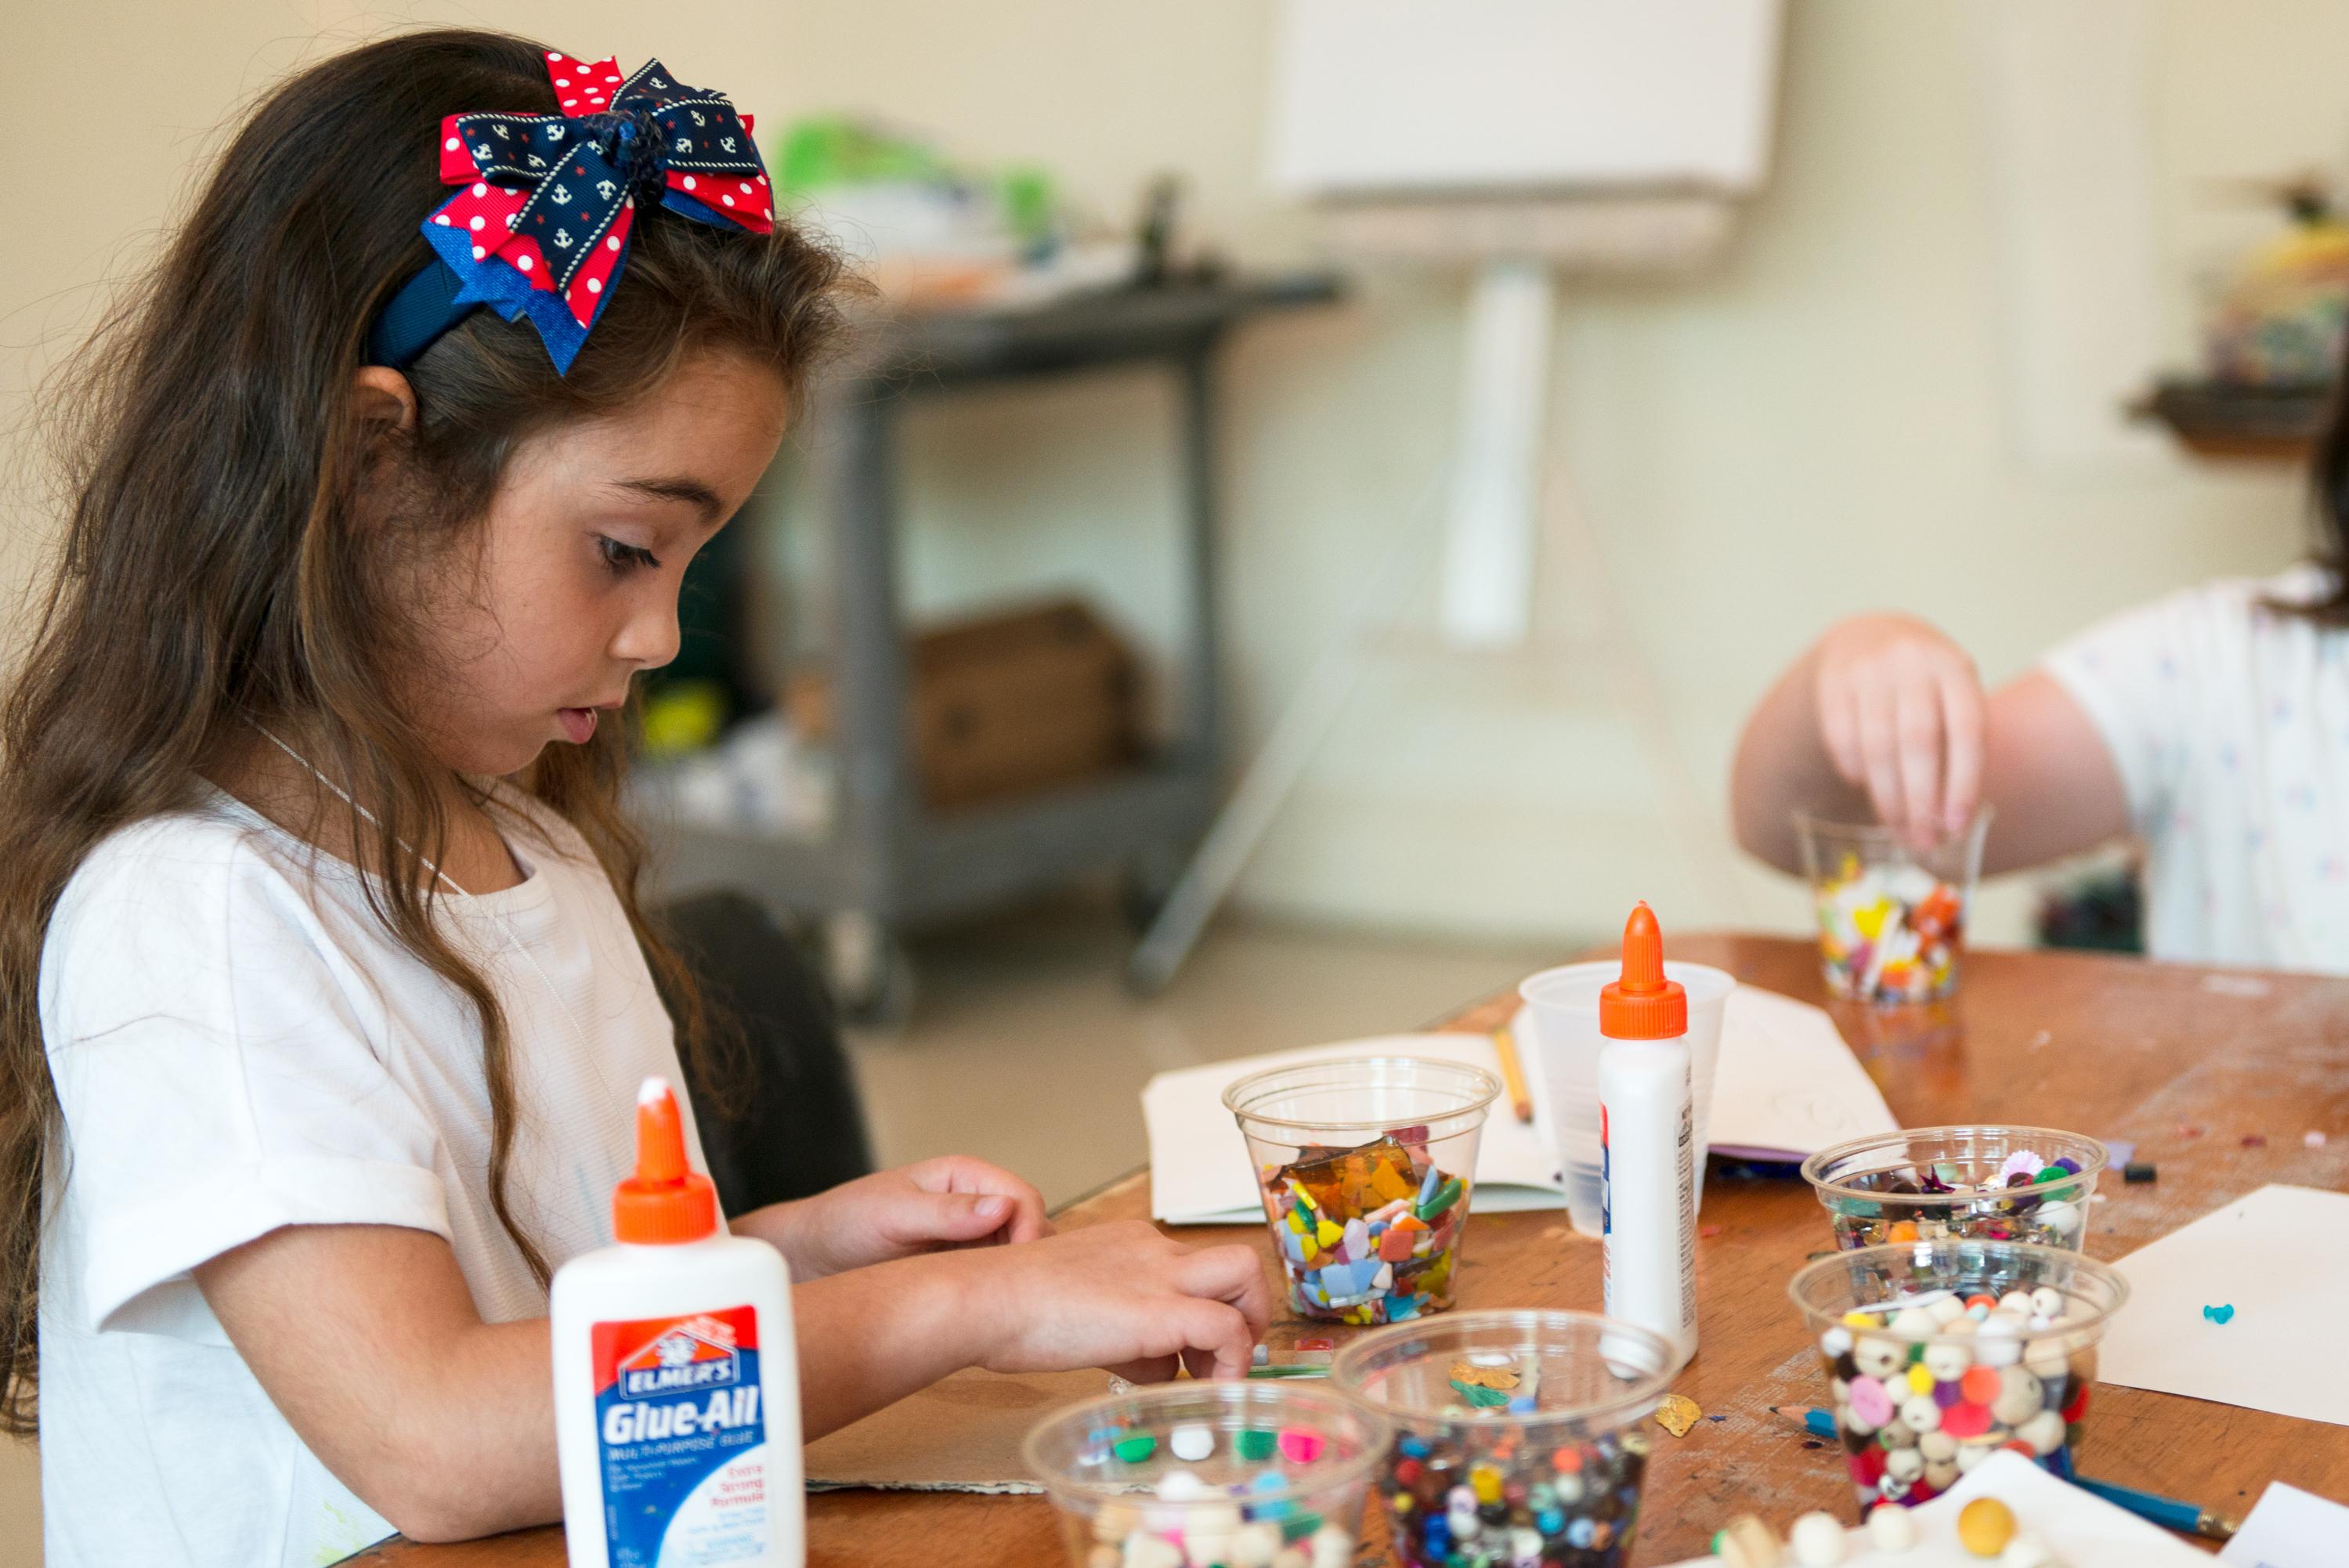 Young child crafting with glue and beads